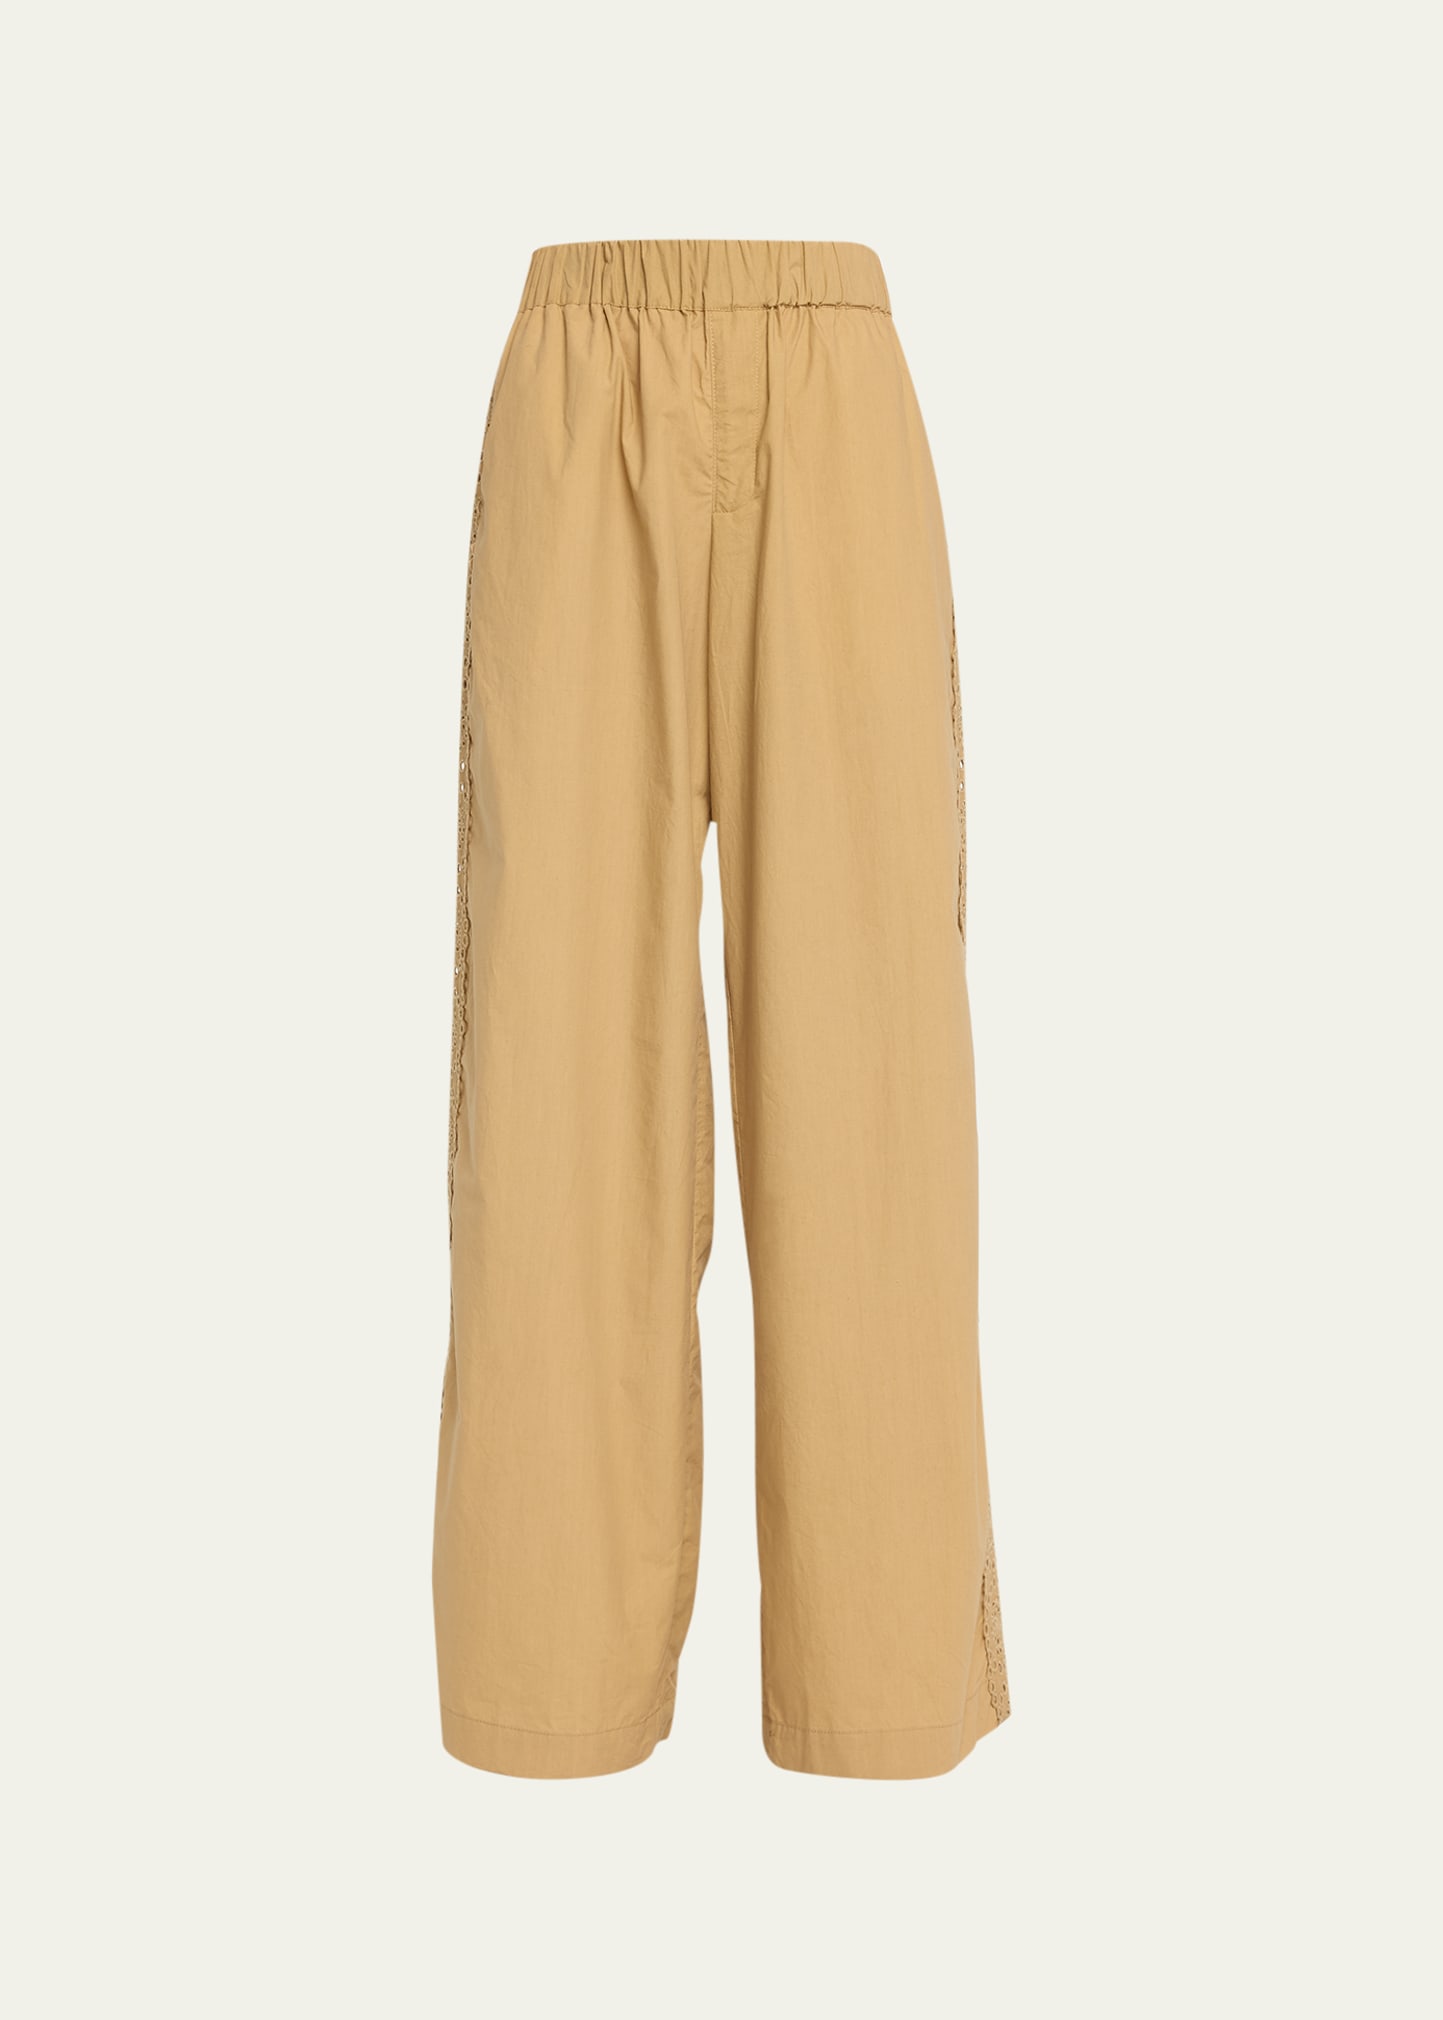 Sea Maeve Eyelet Track Pants In Chino